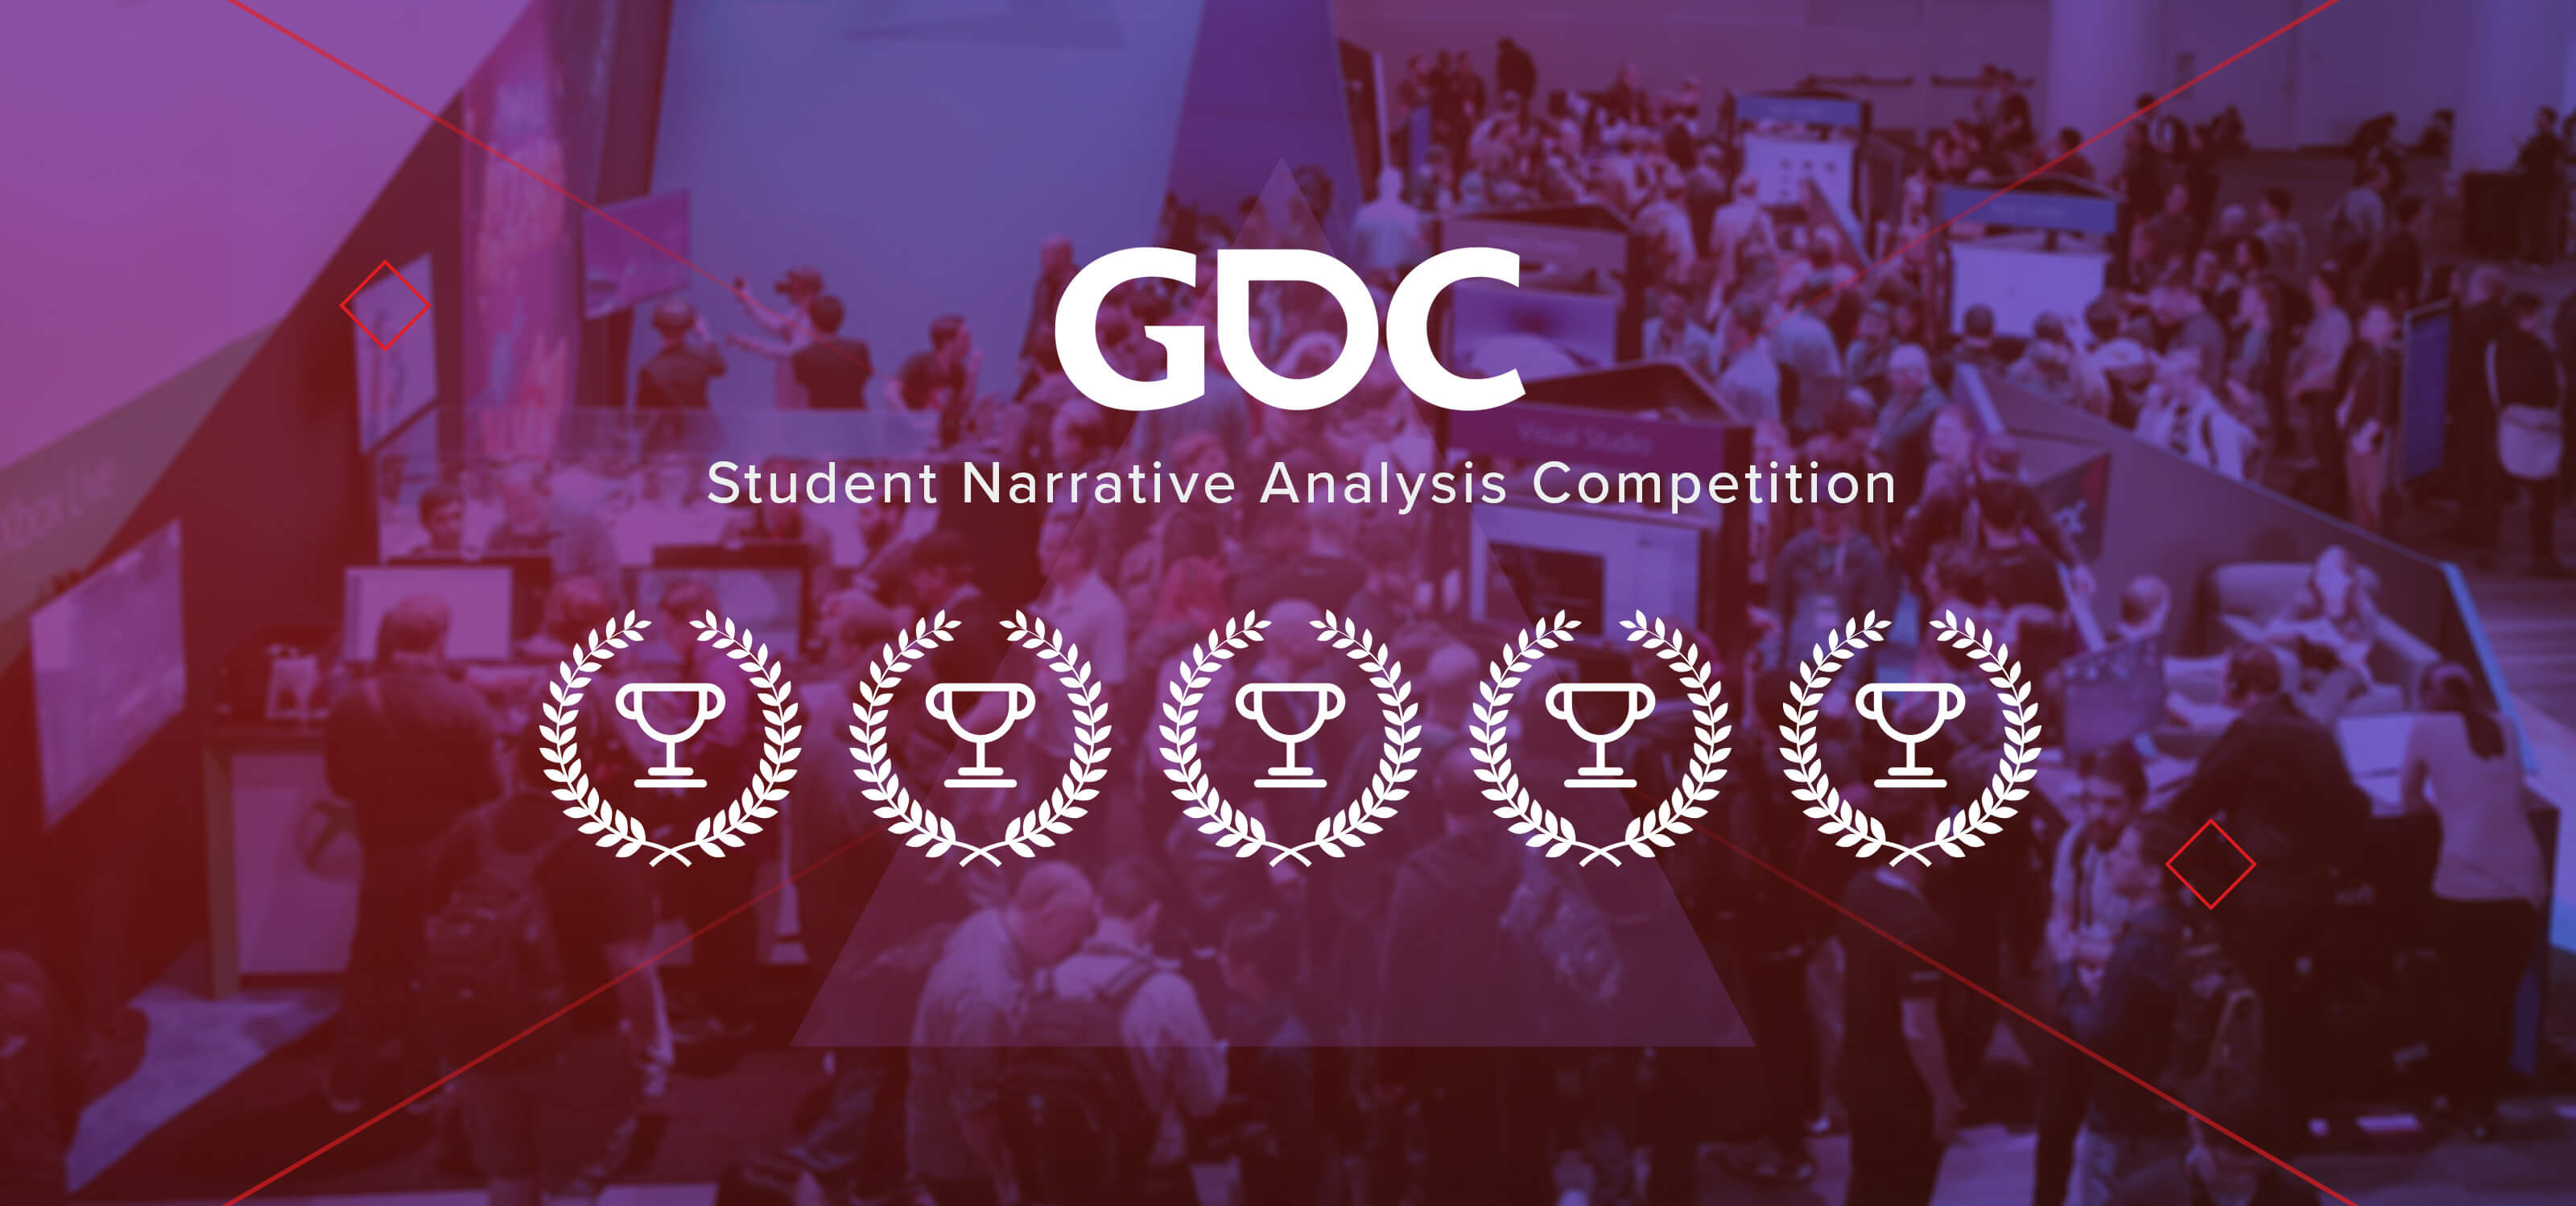 A scene from GDC with five award laurels on top and the words “GDC Student Narrative Analysis Competition.